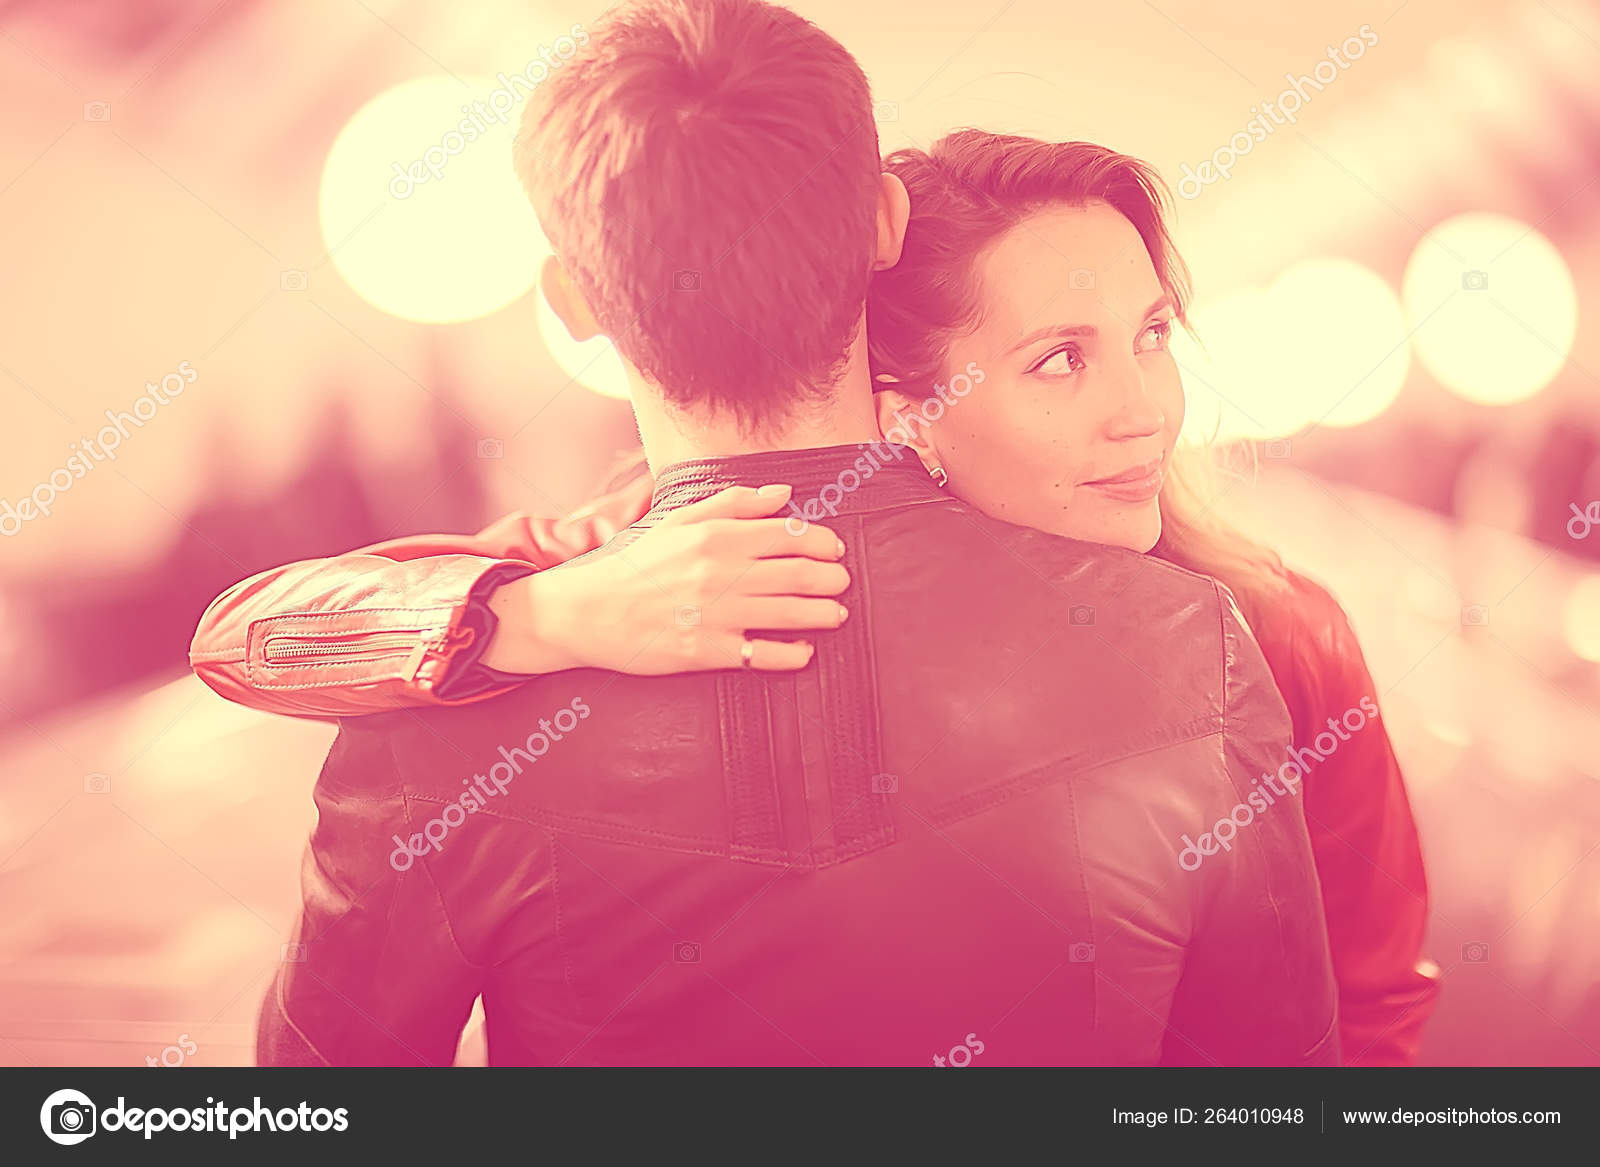 Couple Love Pink Toning Young Married Couple Walks France Paris Stock Photo by ©xload 264010948 image